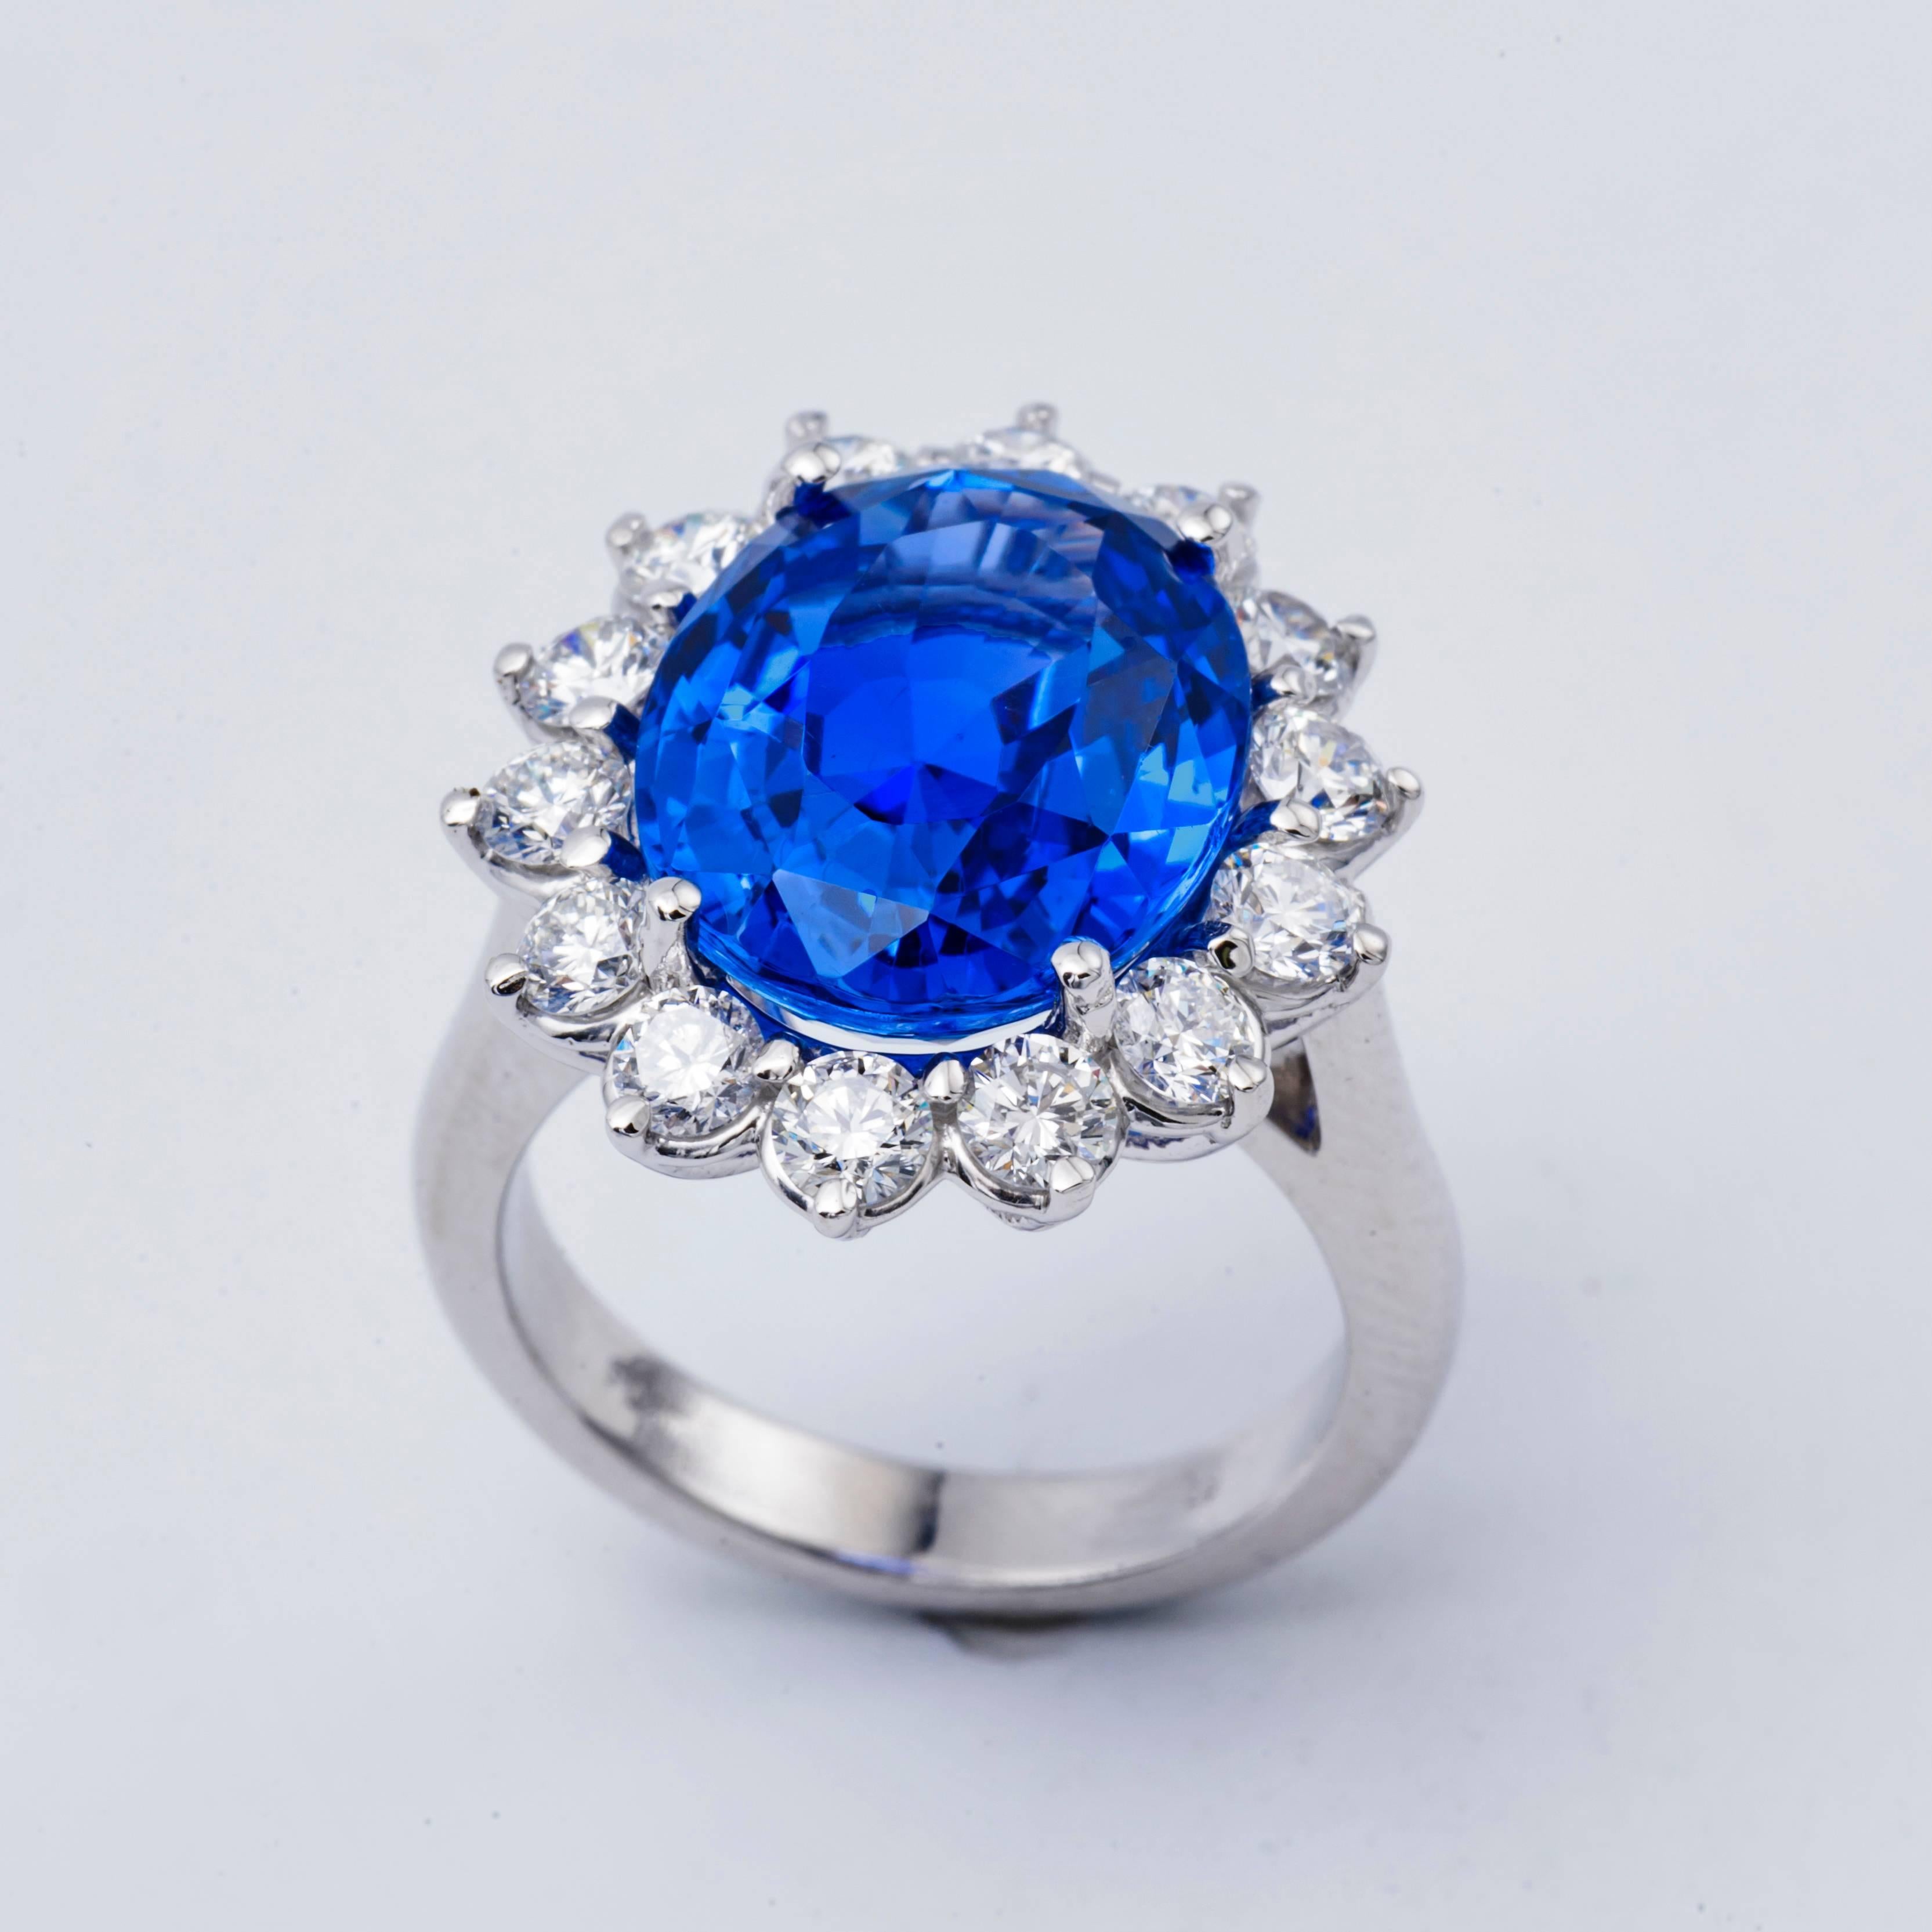 Platinum Ring
Unheated Sapphire 10.54 Carats.
Diamonds :1.85 Carats
Comes with GIA Certificate
This rare Sapphire is full of life, with beautiful color.
The diamonds are very white and well made.
ONE OF A KIND!!!!